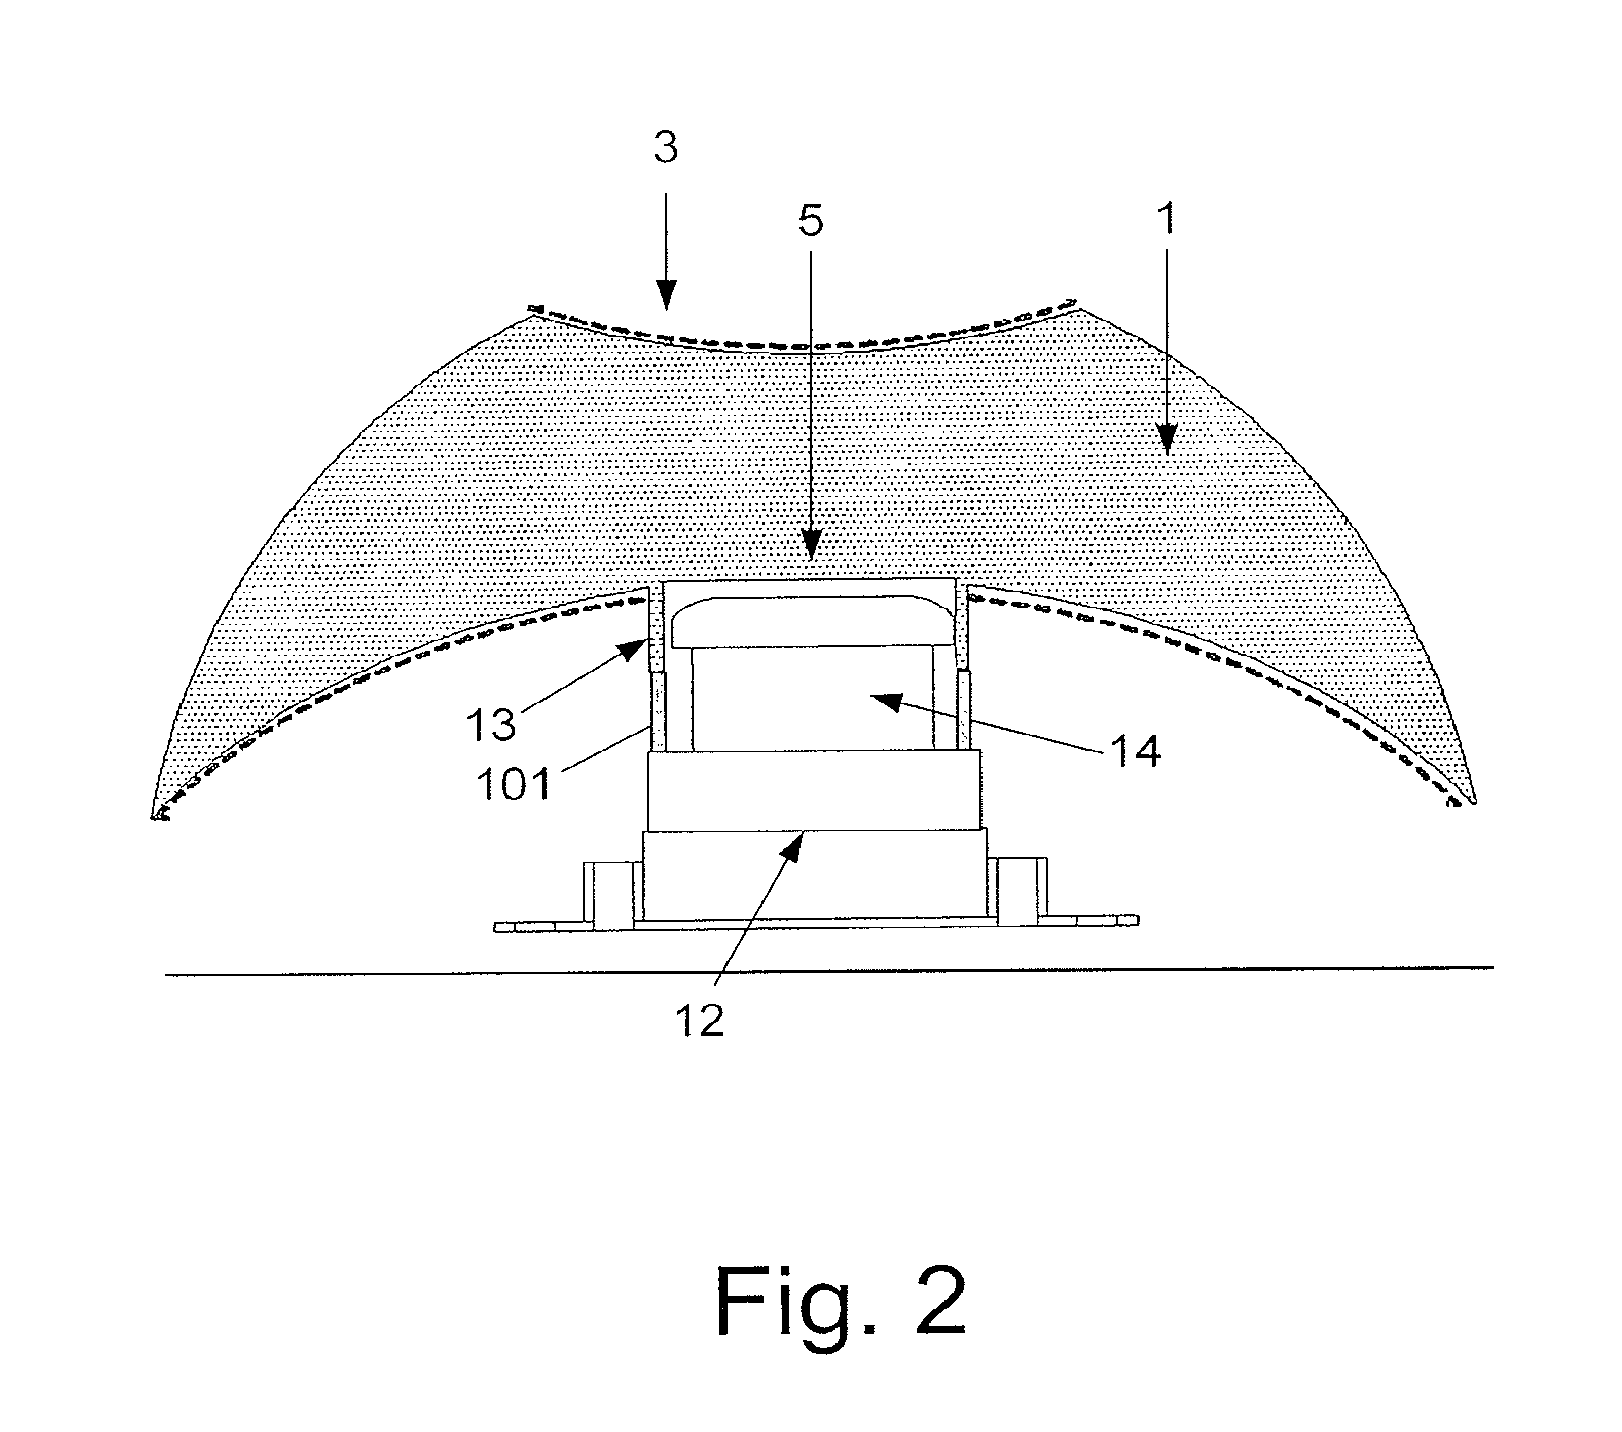 Omni-directional imaging and illumination assembly